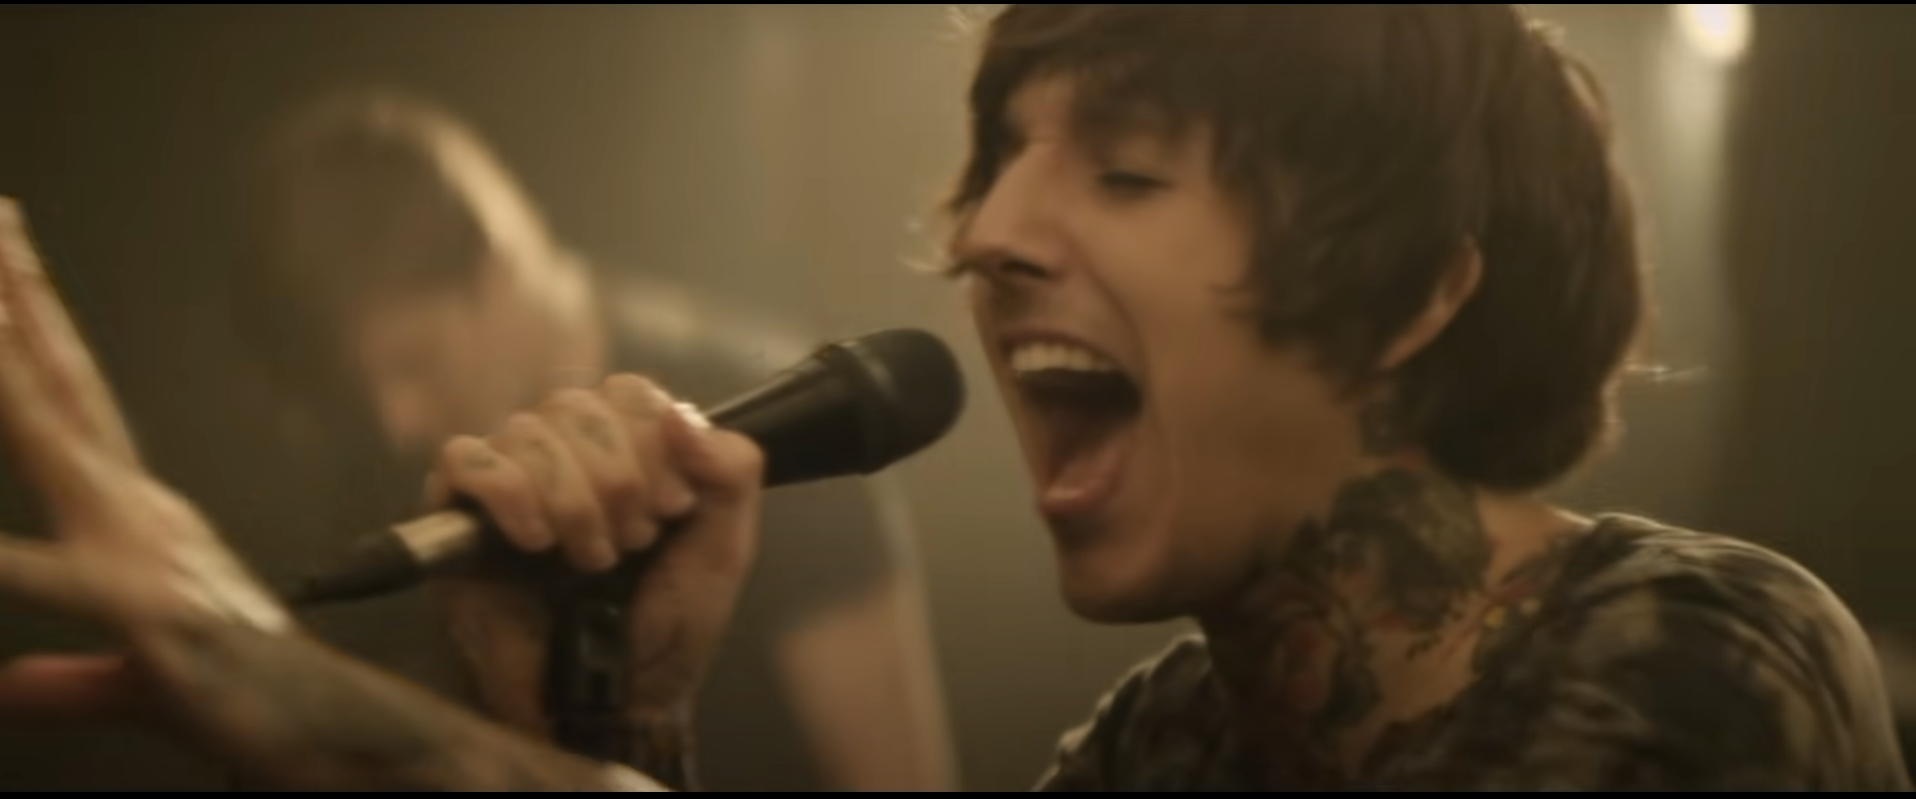 Can You Feel My Heart by Bring Me The Horizon